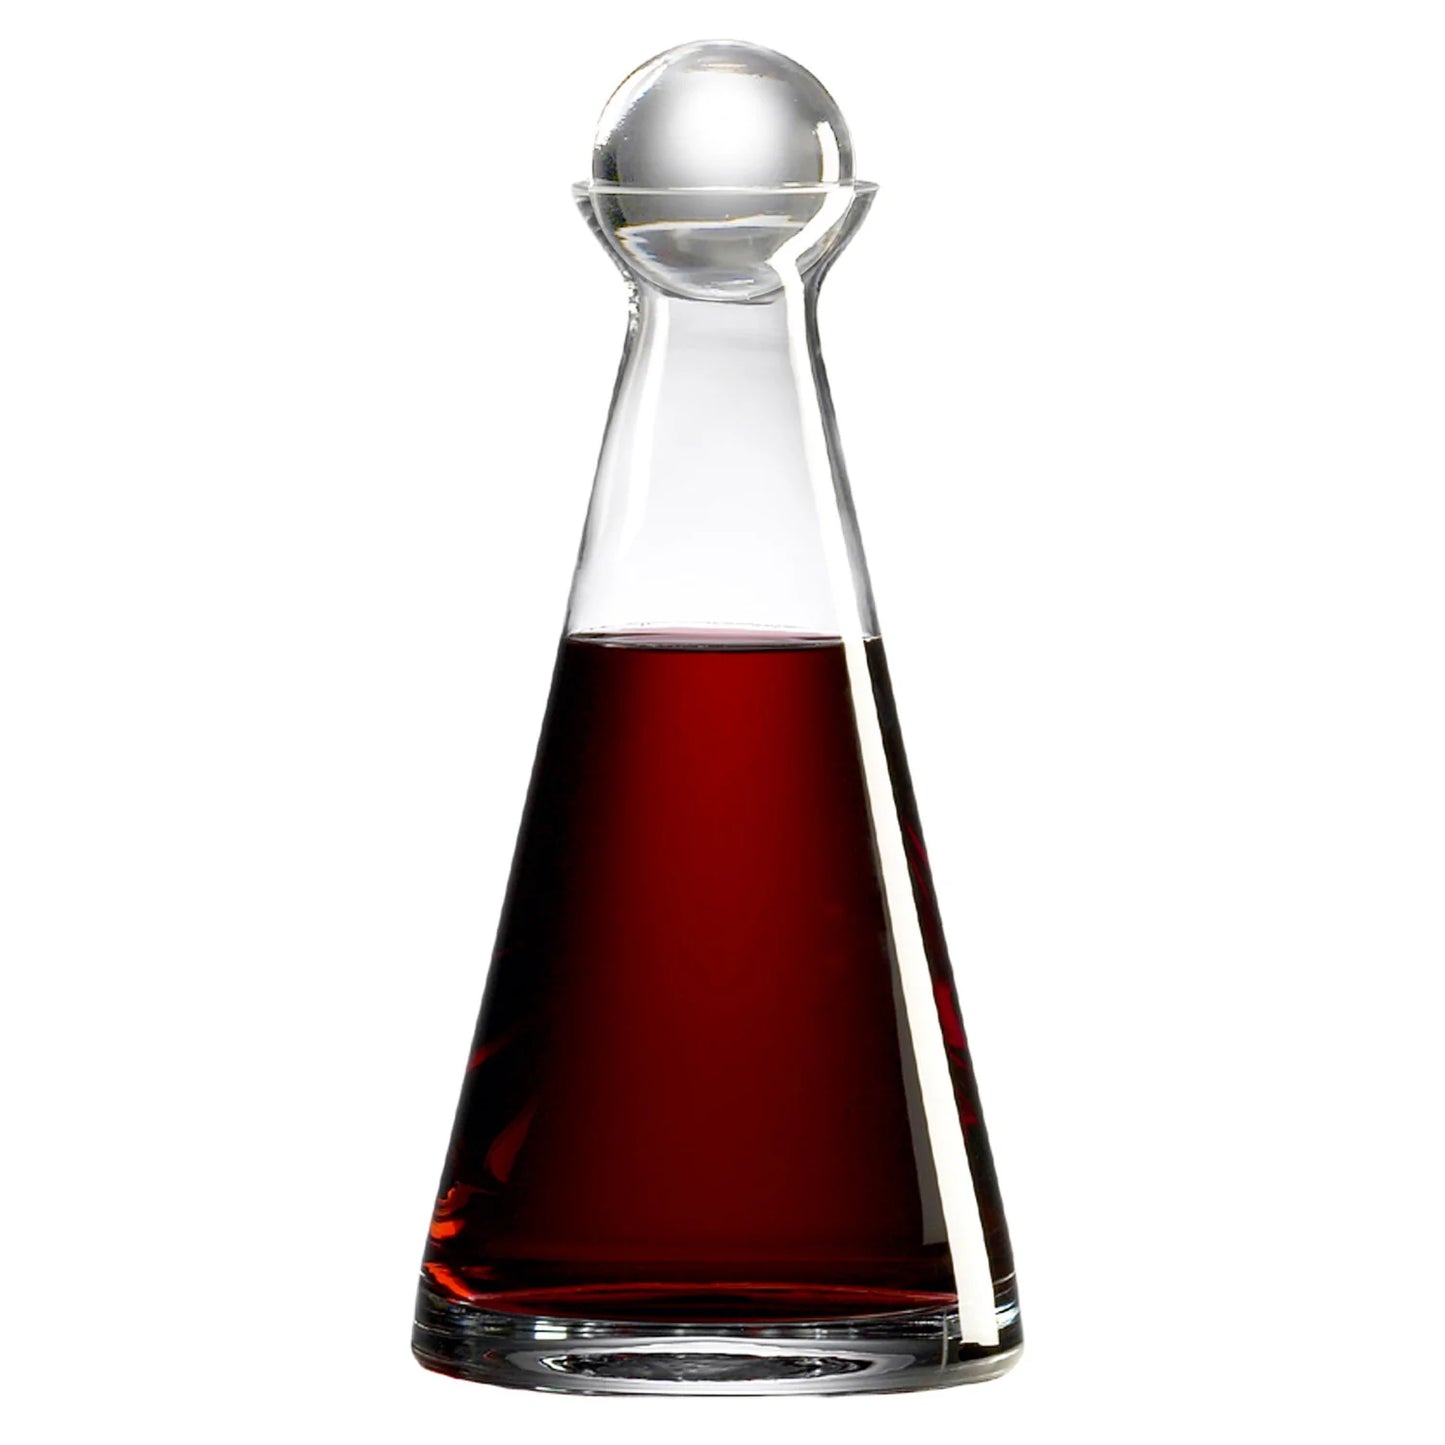 Ravenscroft Crystal Pinnacle Decanter with Free Luxury Satin Decanter and Stopper Bags W3053